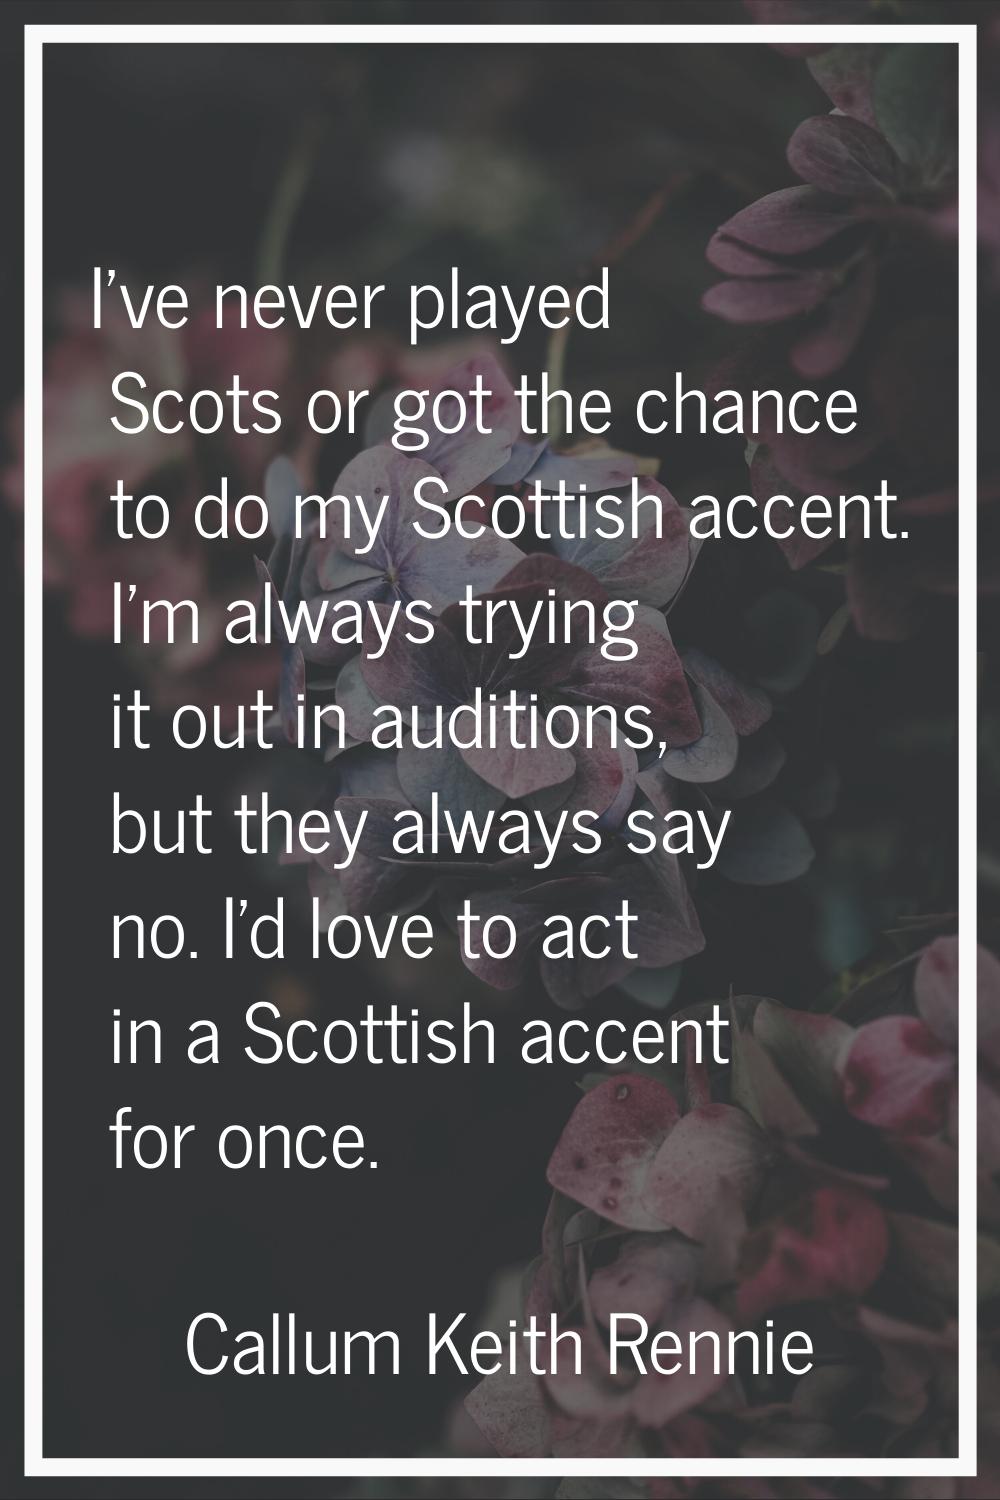 I've never played Scots or got the chance to do my Scottish accent. I'm always trying it out in aud